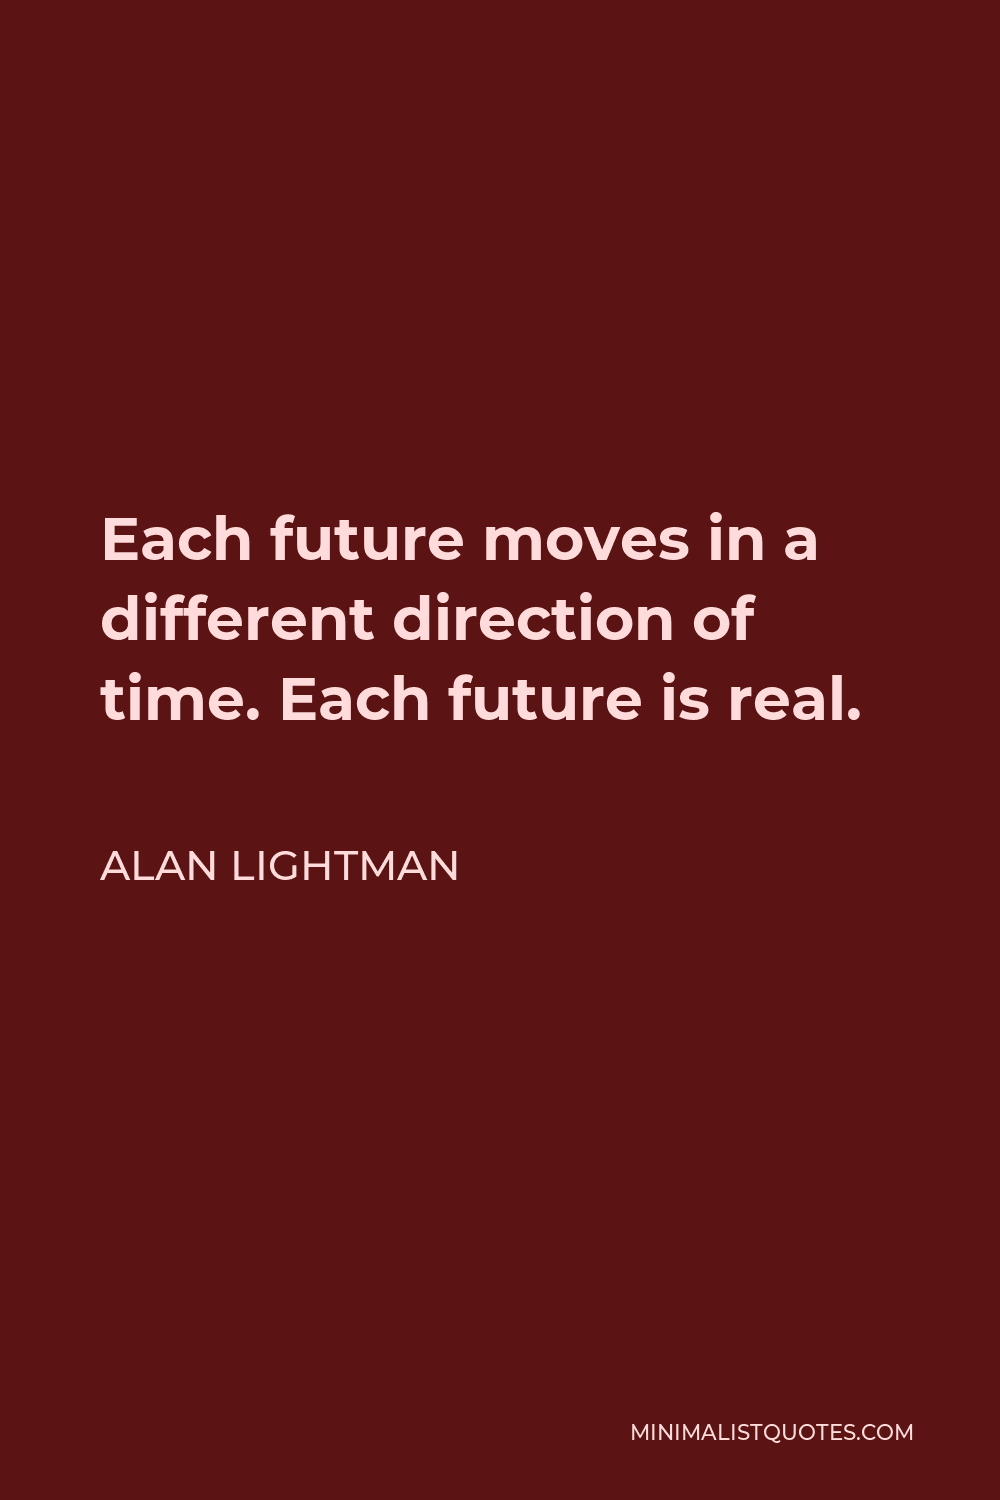 Alan Lightman Quote - Each future moves in a different direction of time. Each future is real.